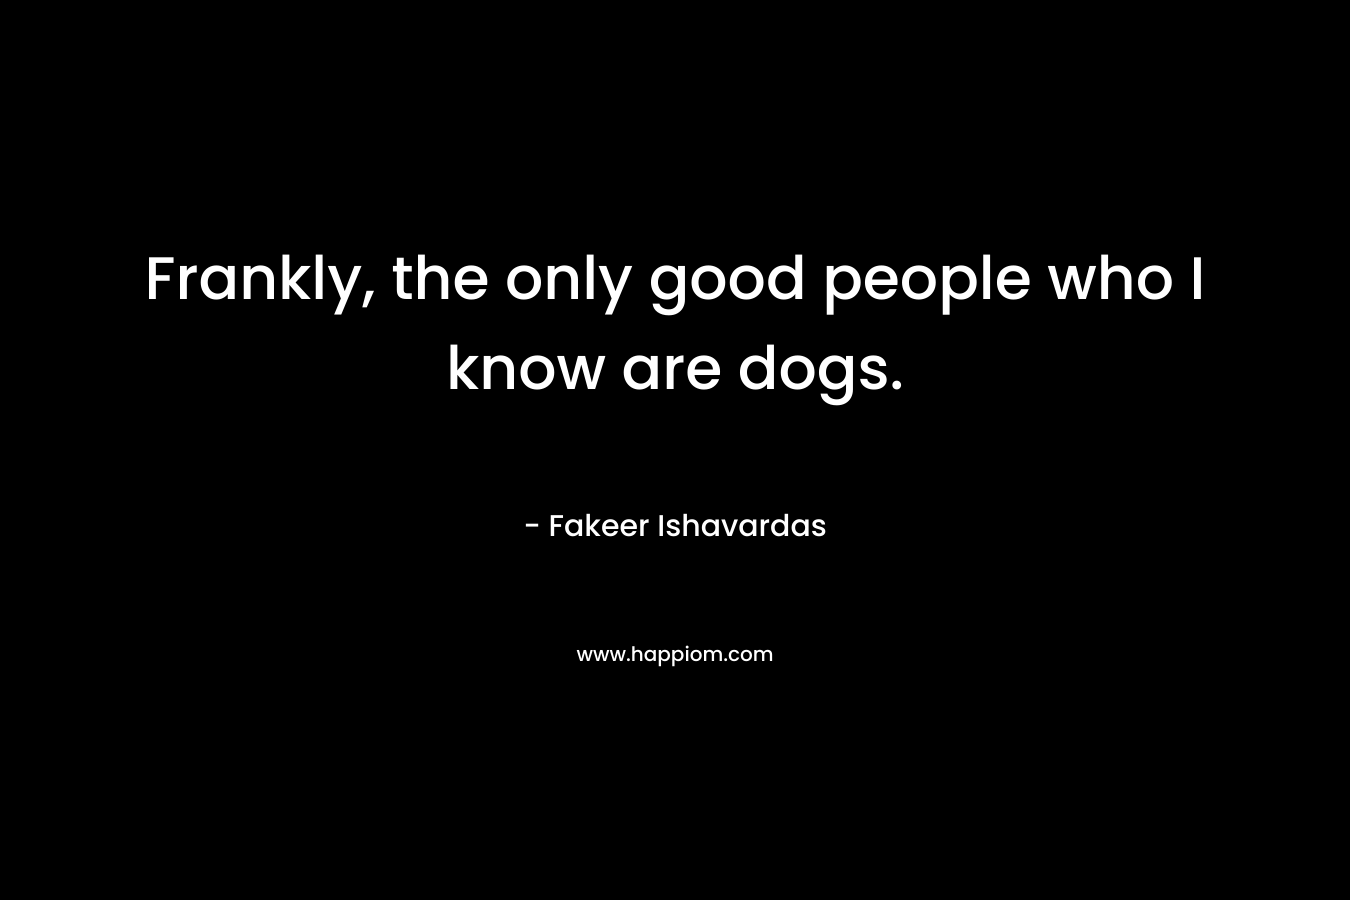 Frankly, the only good people who I know are dogs. – Fakeer Ishavardas